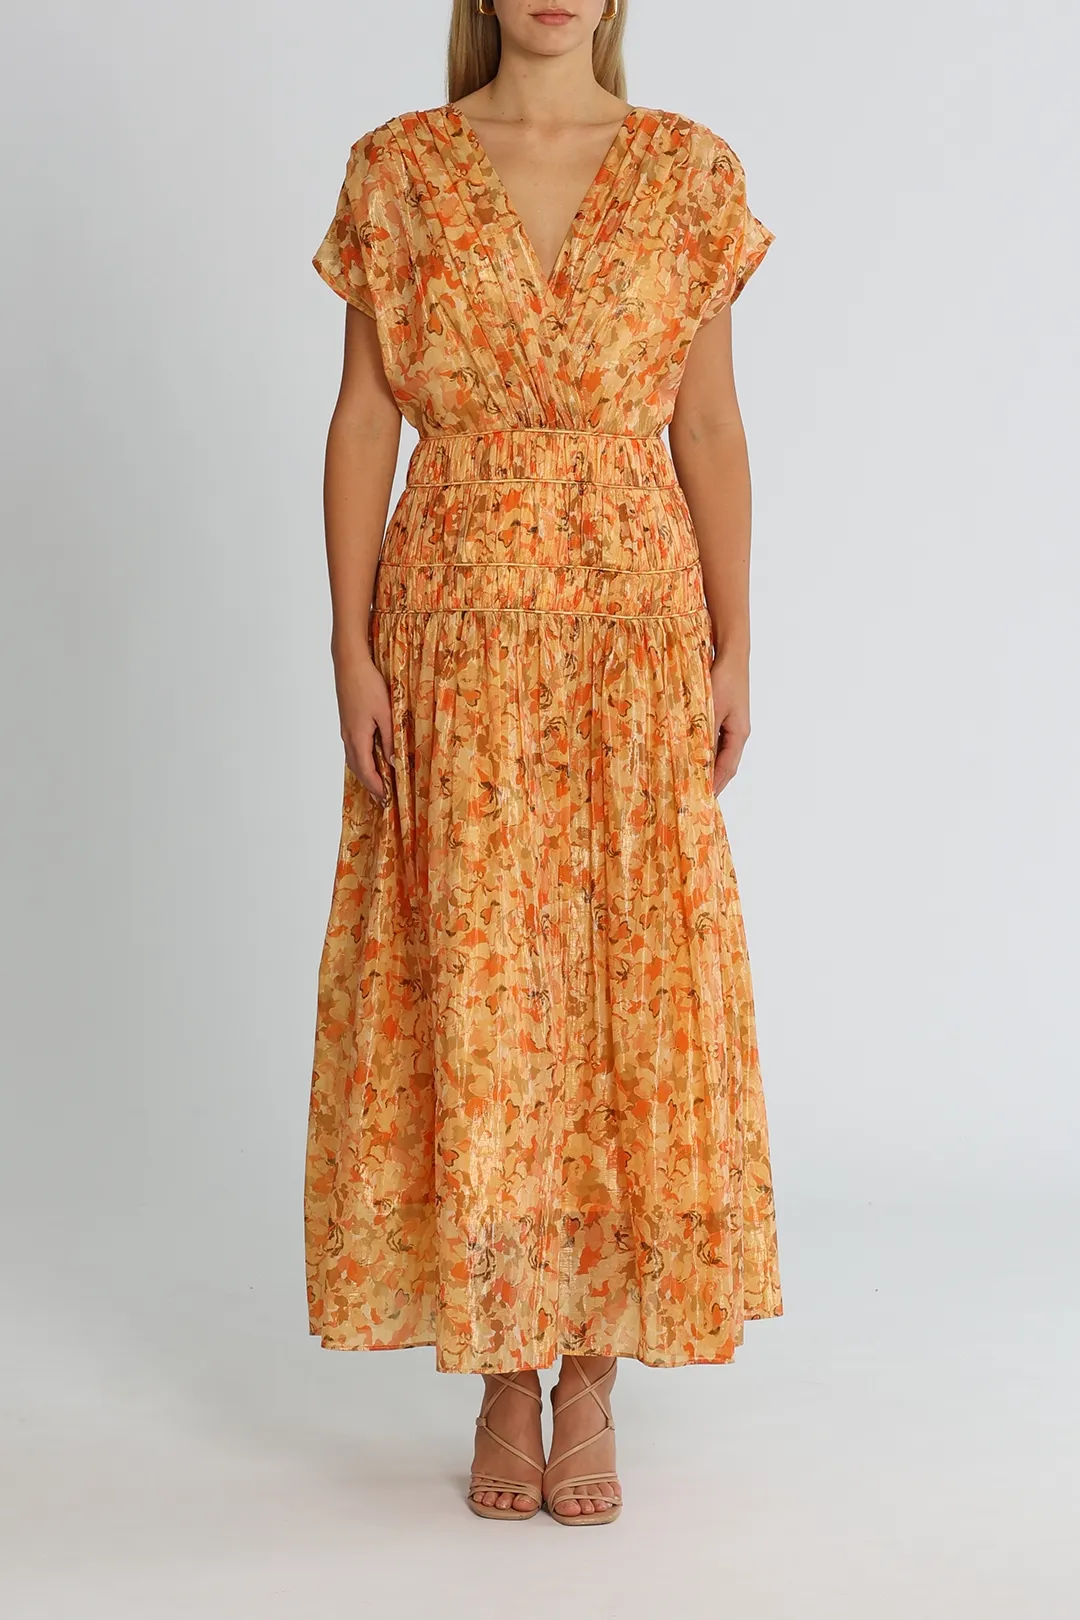 Peach Parfait Bicknell Dress by Acler available for hire.